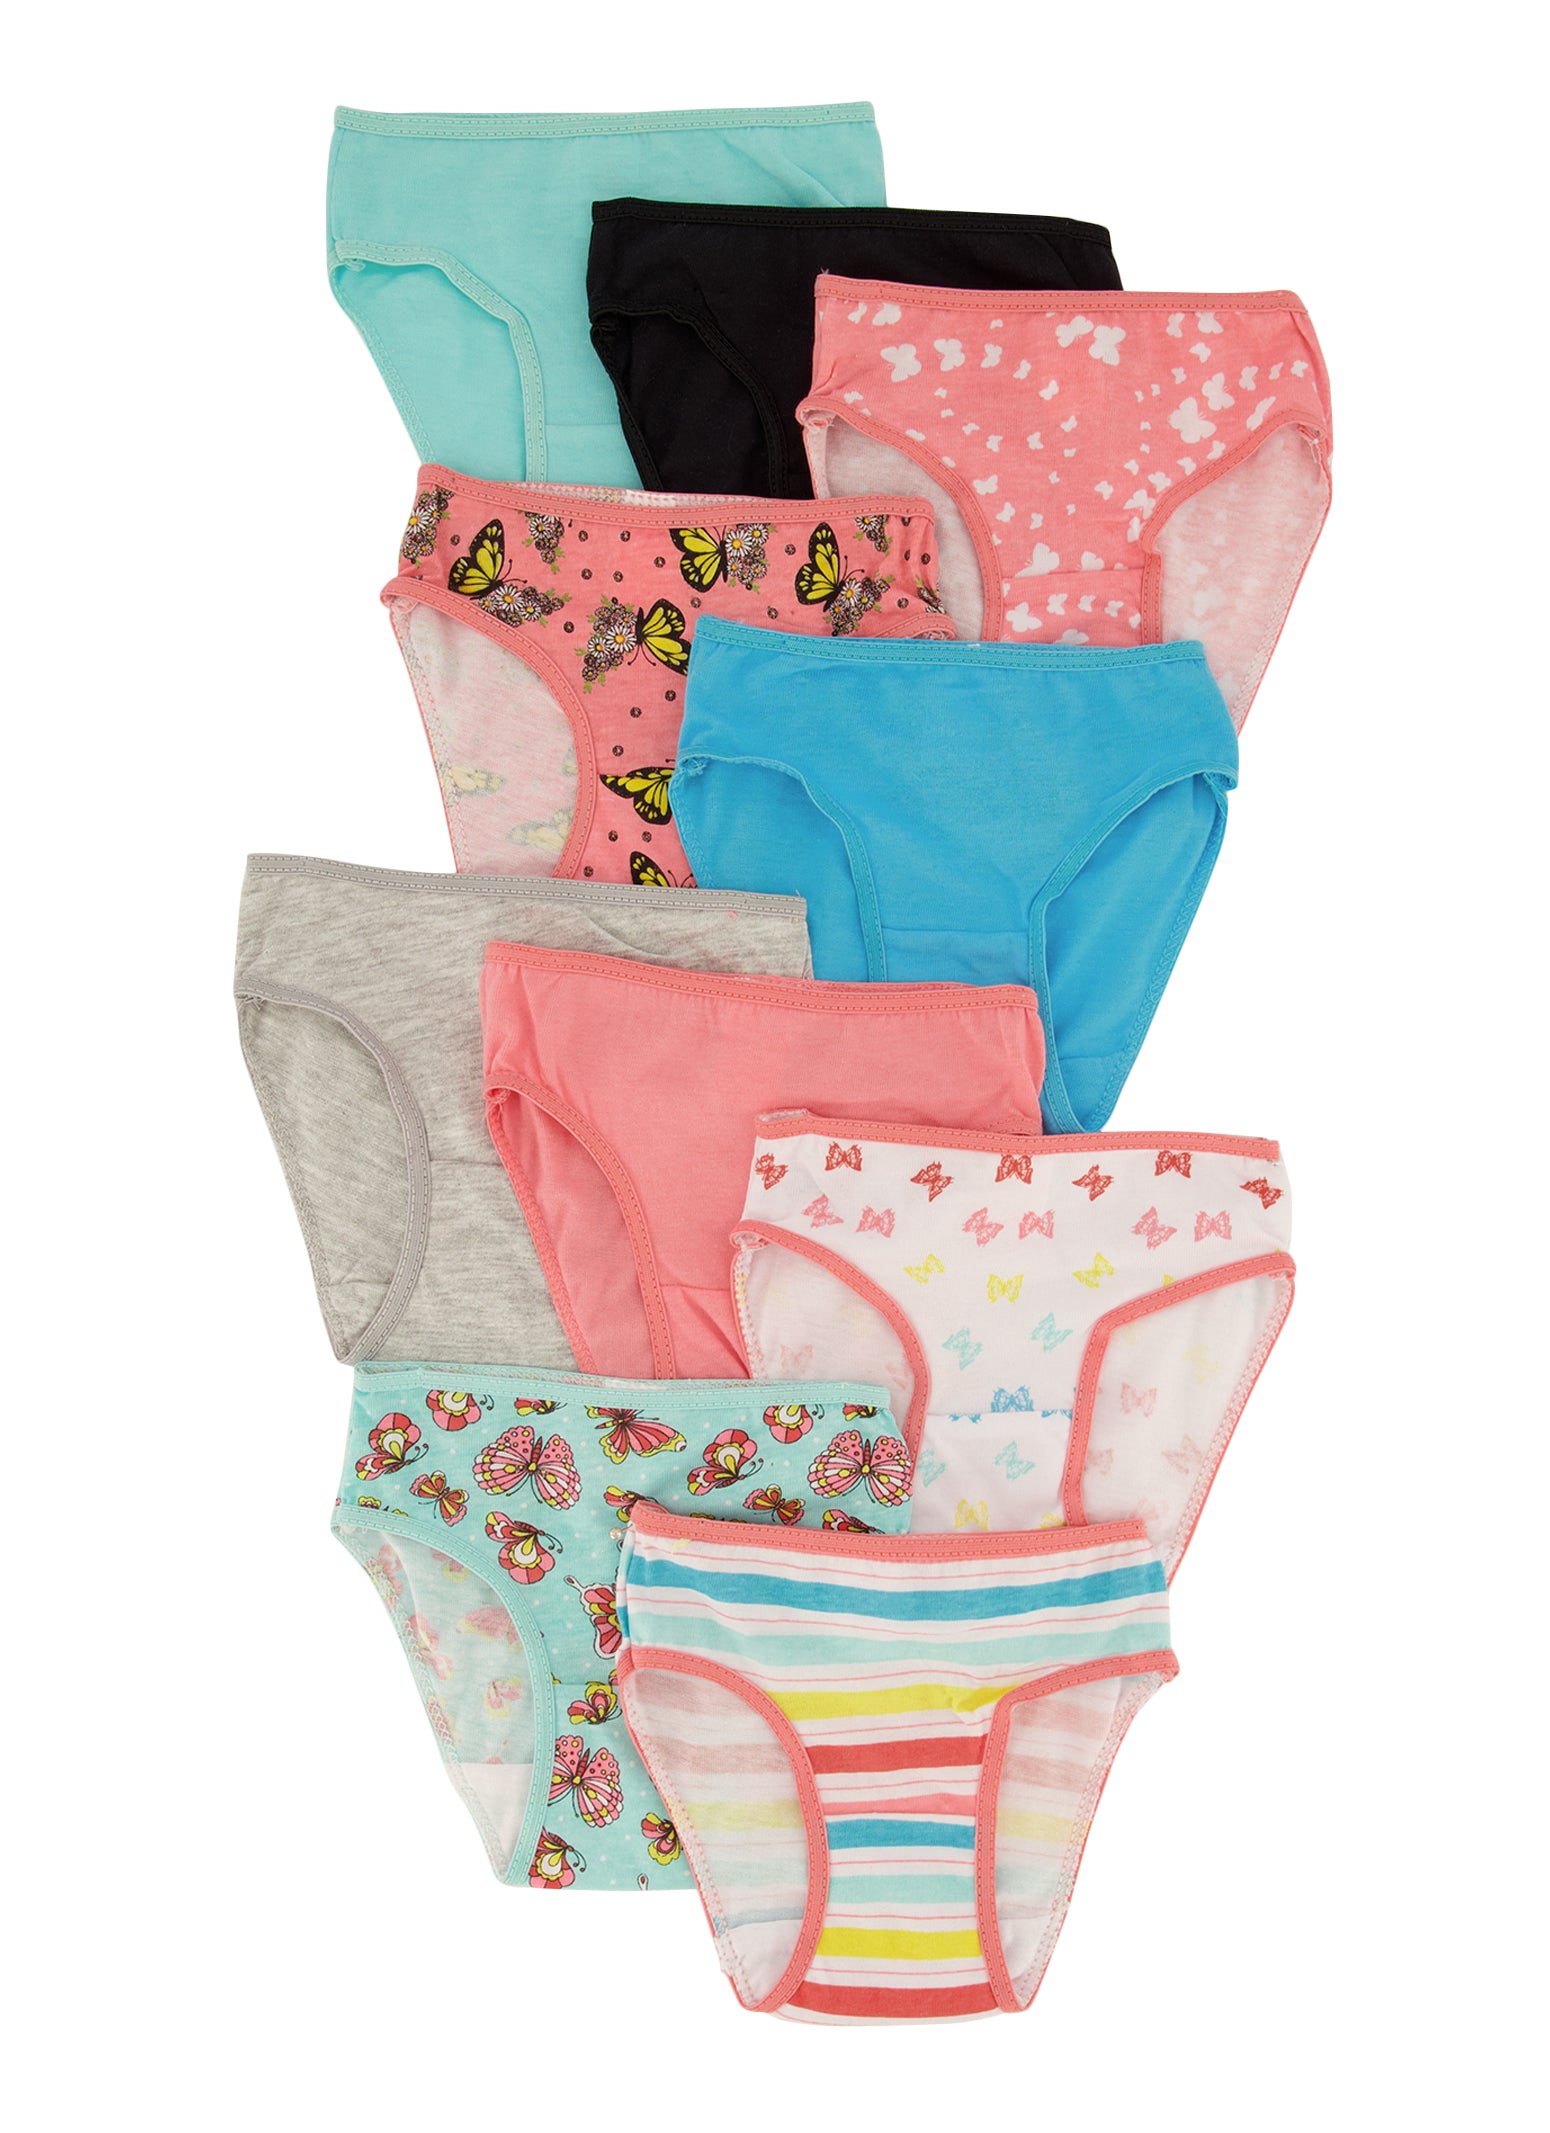 Pampers Easy Ups Girls' My Little Pony Disposable Training Underwear - 5T-6T  